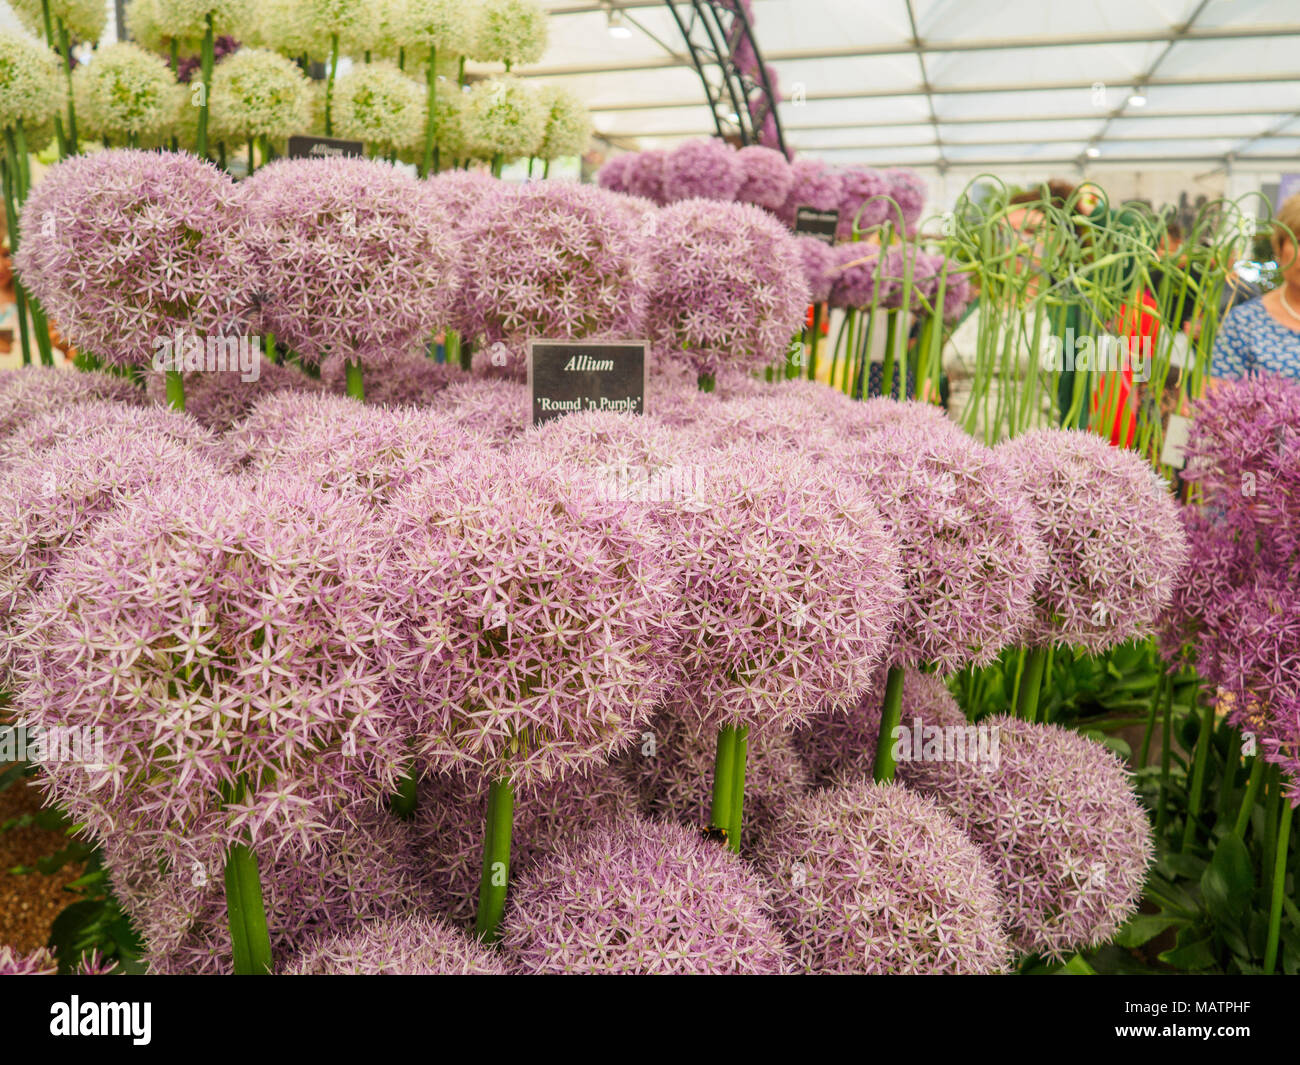 LONDON, UK - MAY 25, 2017: RHS Chelsea Flower Show 2017. Closeup view of alliums display. Stock Photo